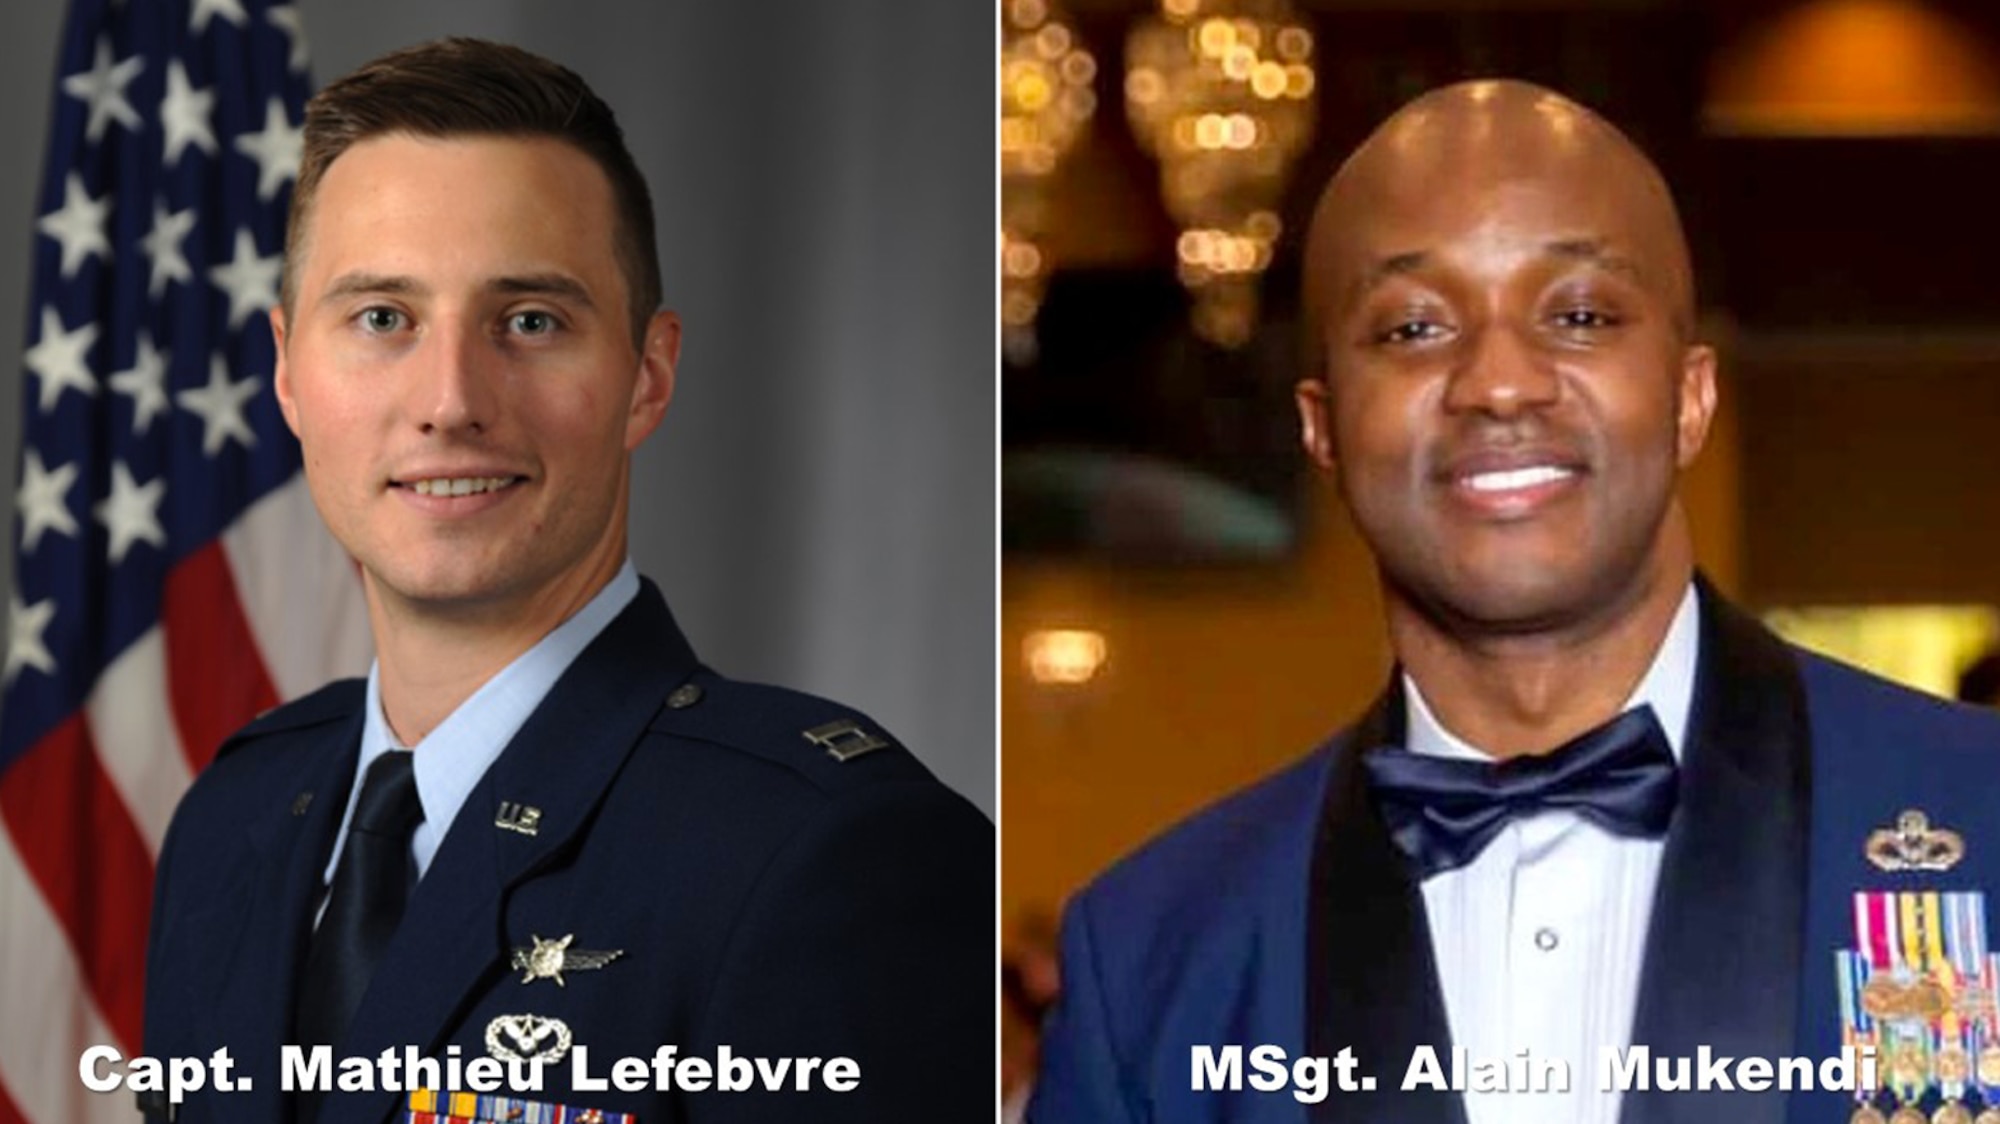 LEAP Scholars Capt. Mathieu Lefebvre and Master Sgt. Alain Mukendi were initially notified of their eligibility for the Coaching Culture Facilitator Course through the MyPers website. Photos courtesy of Capt. Lefebvre and Master Sgt. Mukendi, respectively.